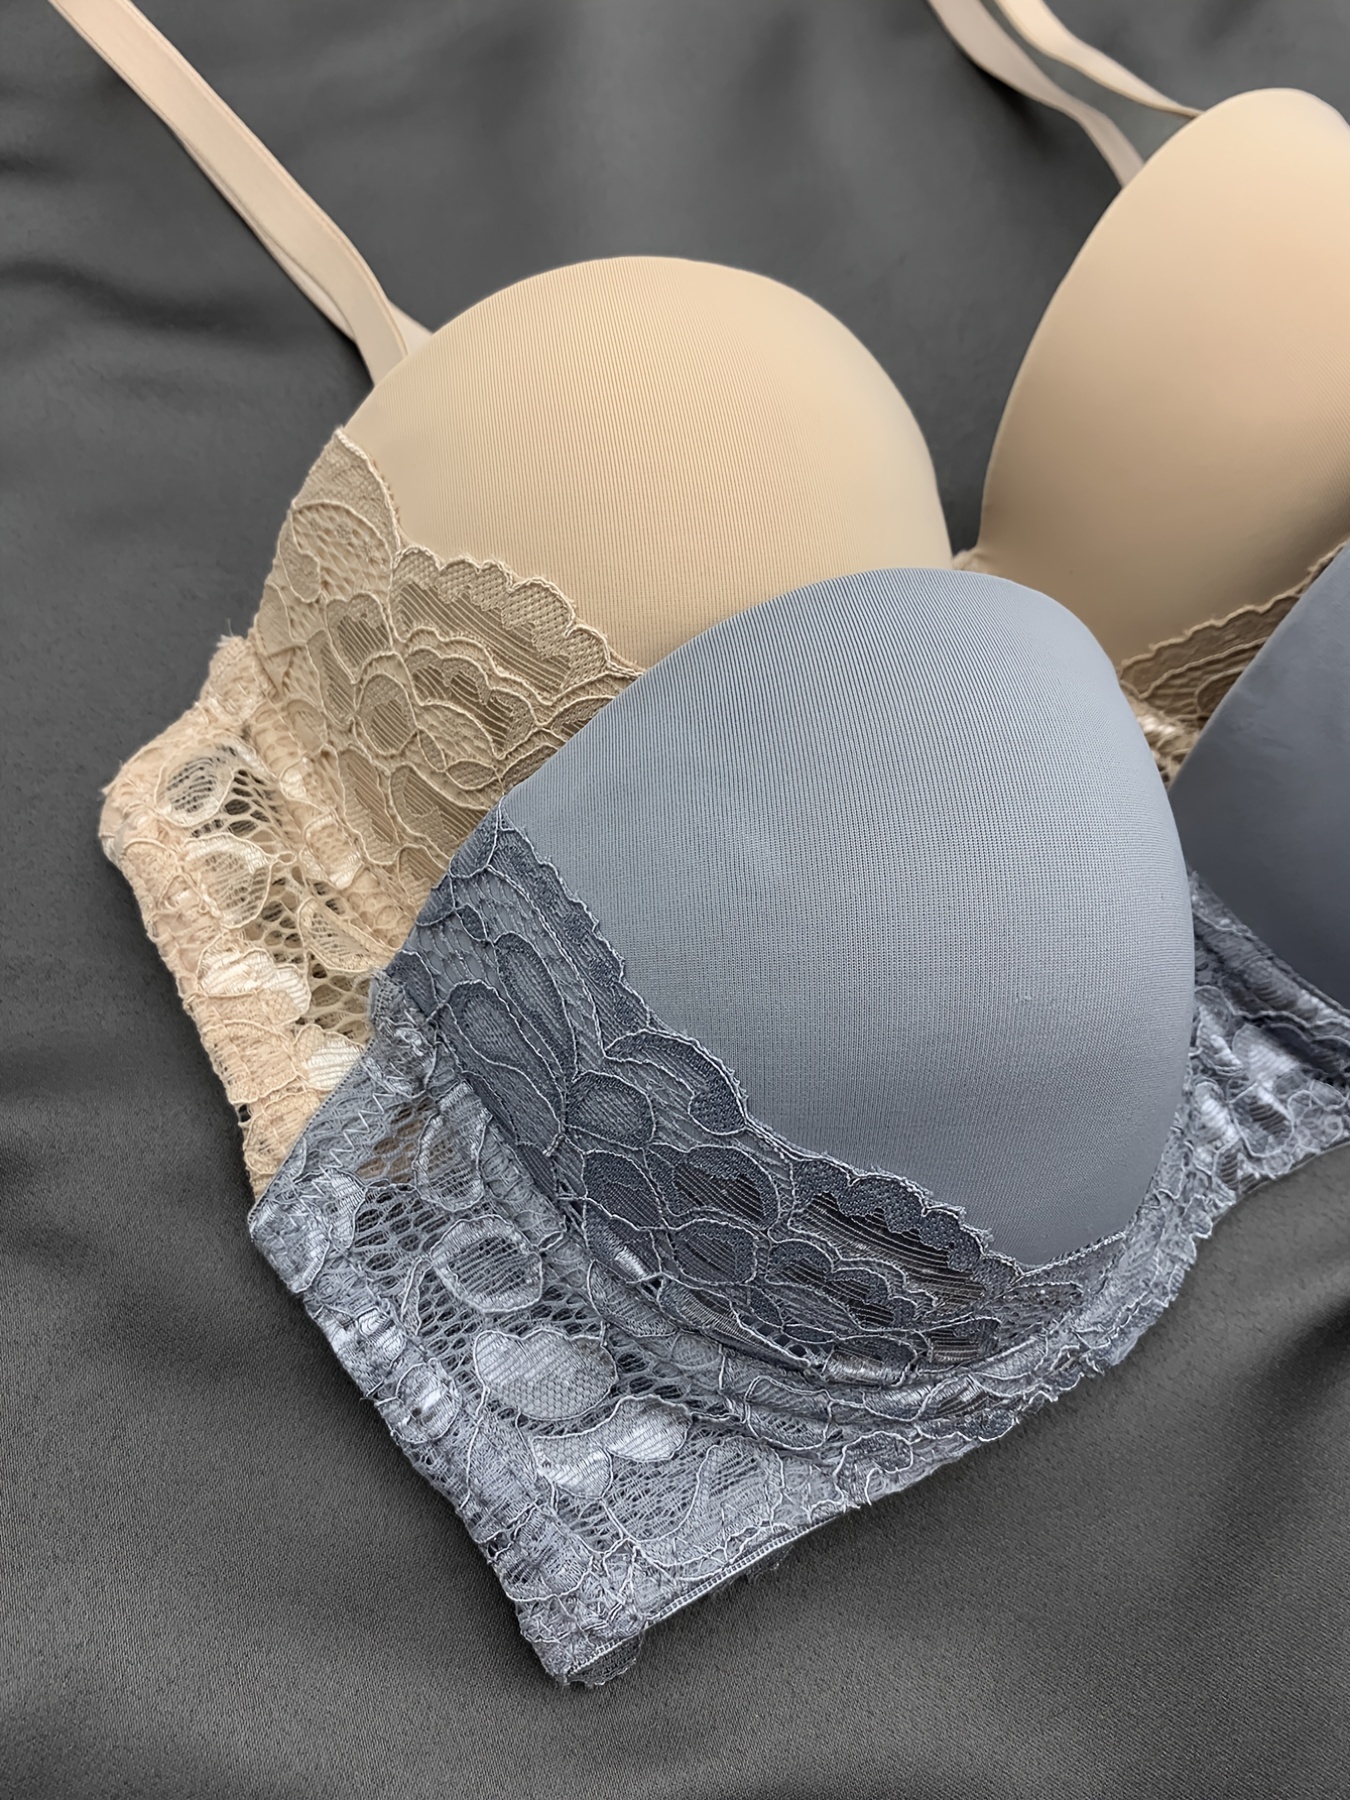 Brief Essentials - Add two extra cup sizes with the super pushup bra. Get  cleavage support and super comfort with this bra. - - Search Allison on  www.briefessentials.com // 8500 // A - D cups. - 